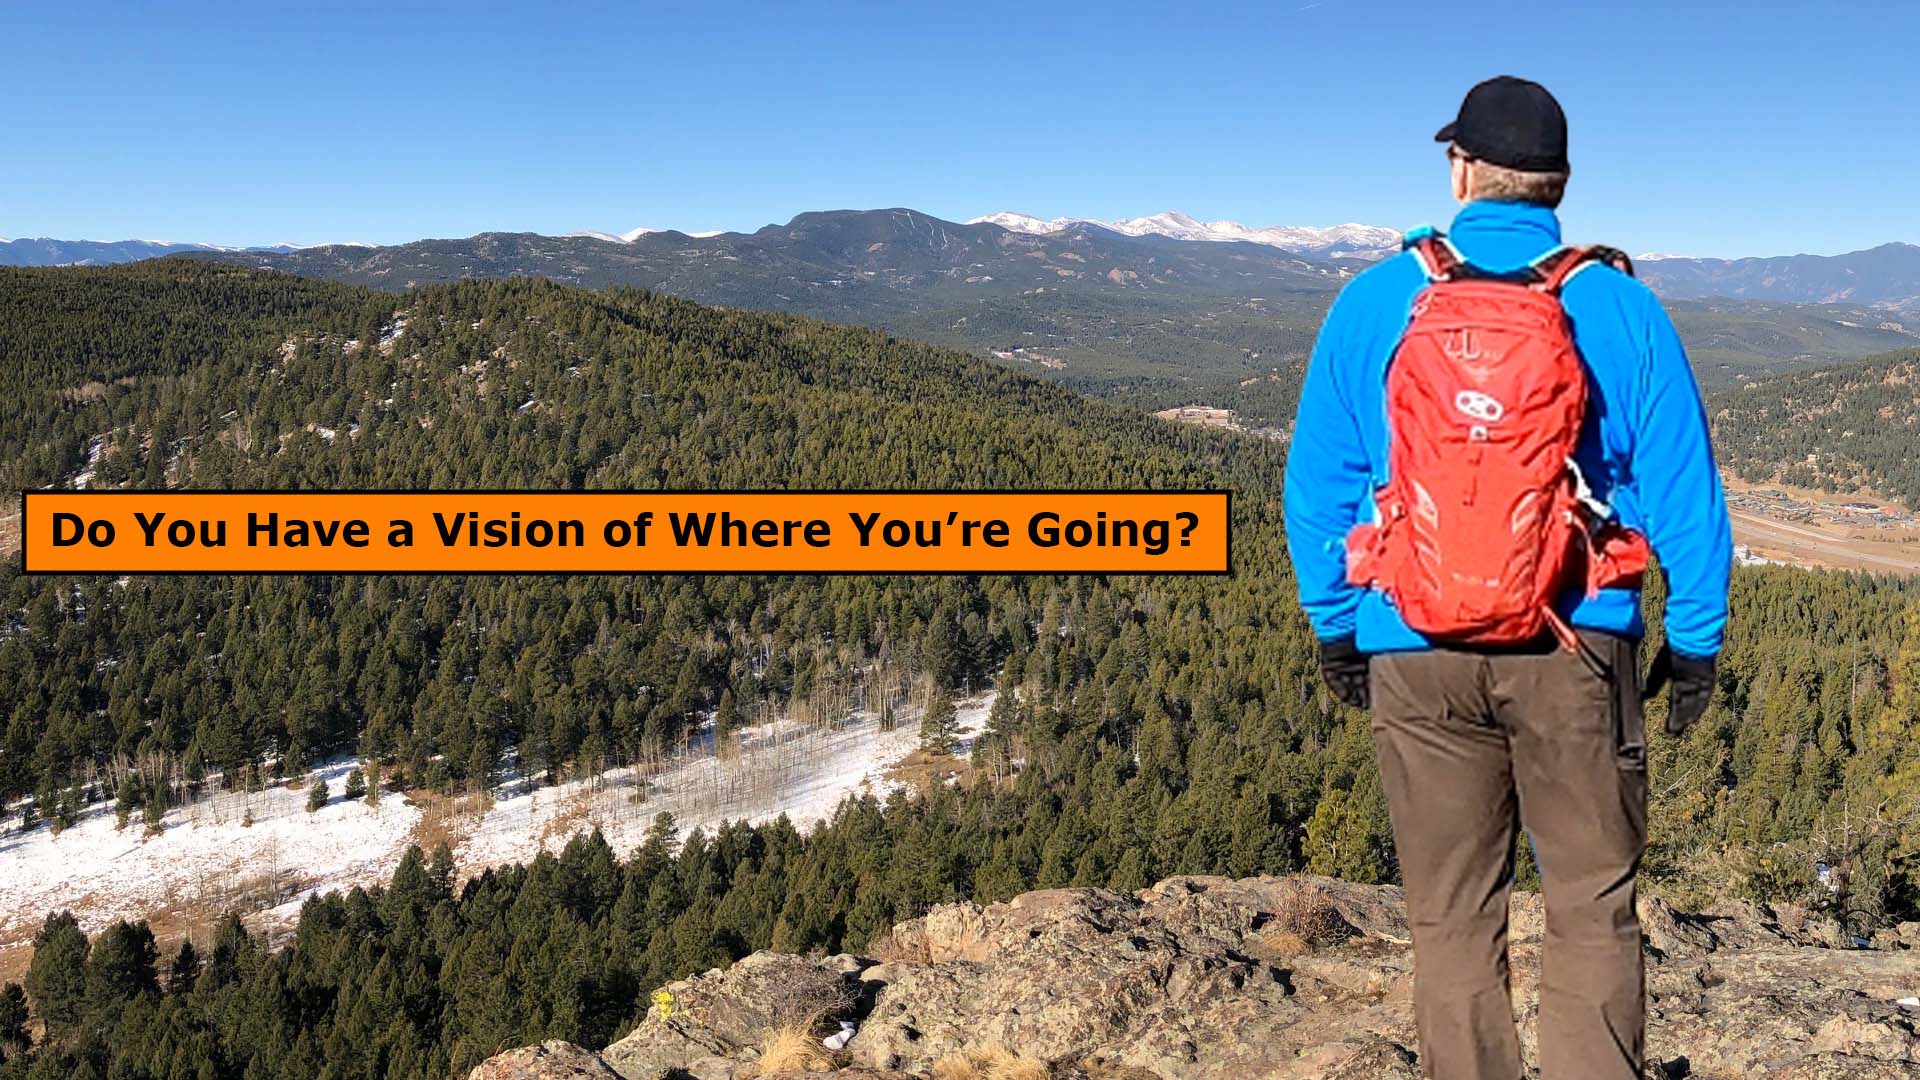 Do You Have a Vision of Where You're Going?